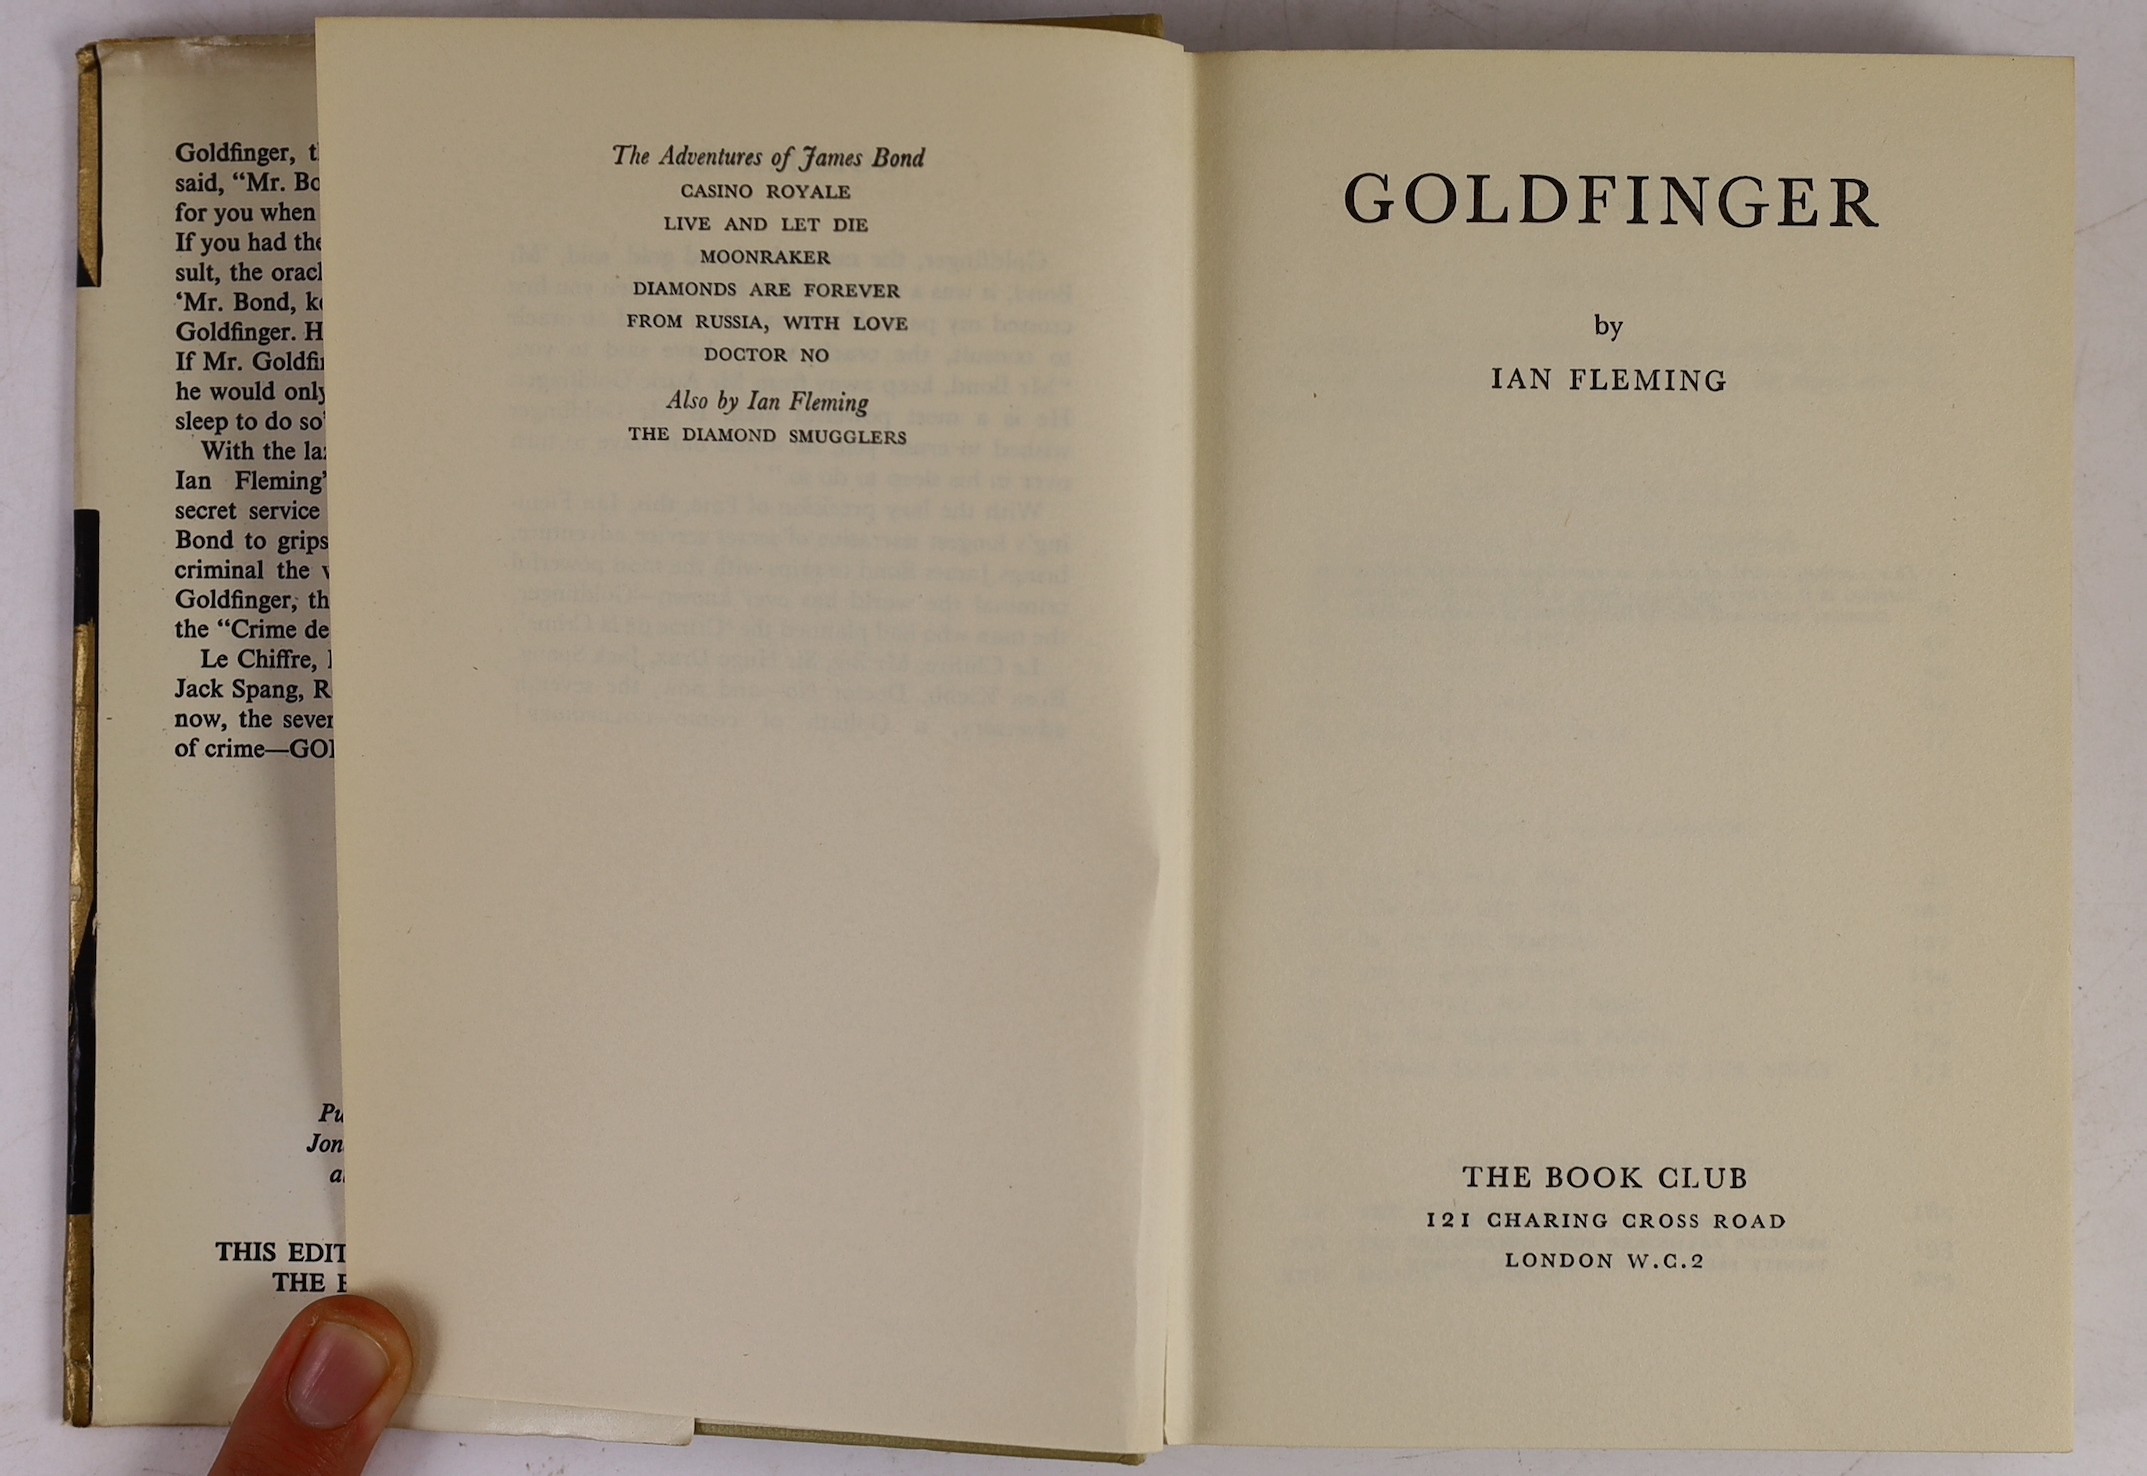 Fleming, Ian - You Only Live Twice, 1st edition, 8vo, original cloth, in unclipped d/j, ownership inscription to front fly leaf, Jonathan Cape, London, 1964; Goldfinger, Book Club Edition, in d/j, London, 1959 and From R